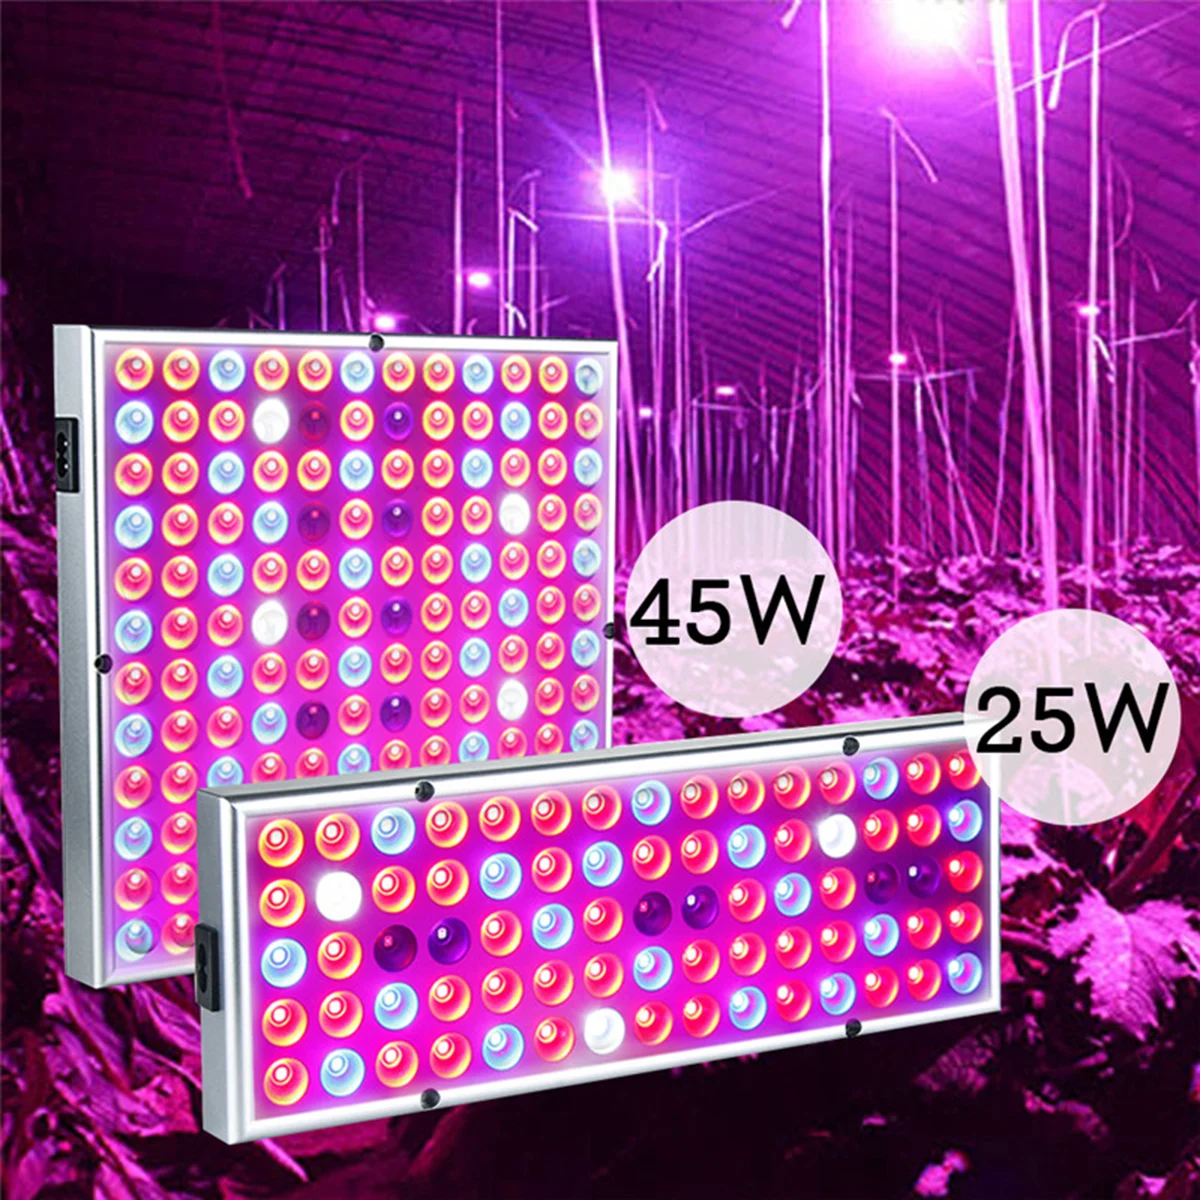 LED Grow Light 45W 144 LED UV IR Growing Lamp for Indoor Plants Hydroponic Plant 